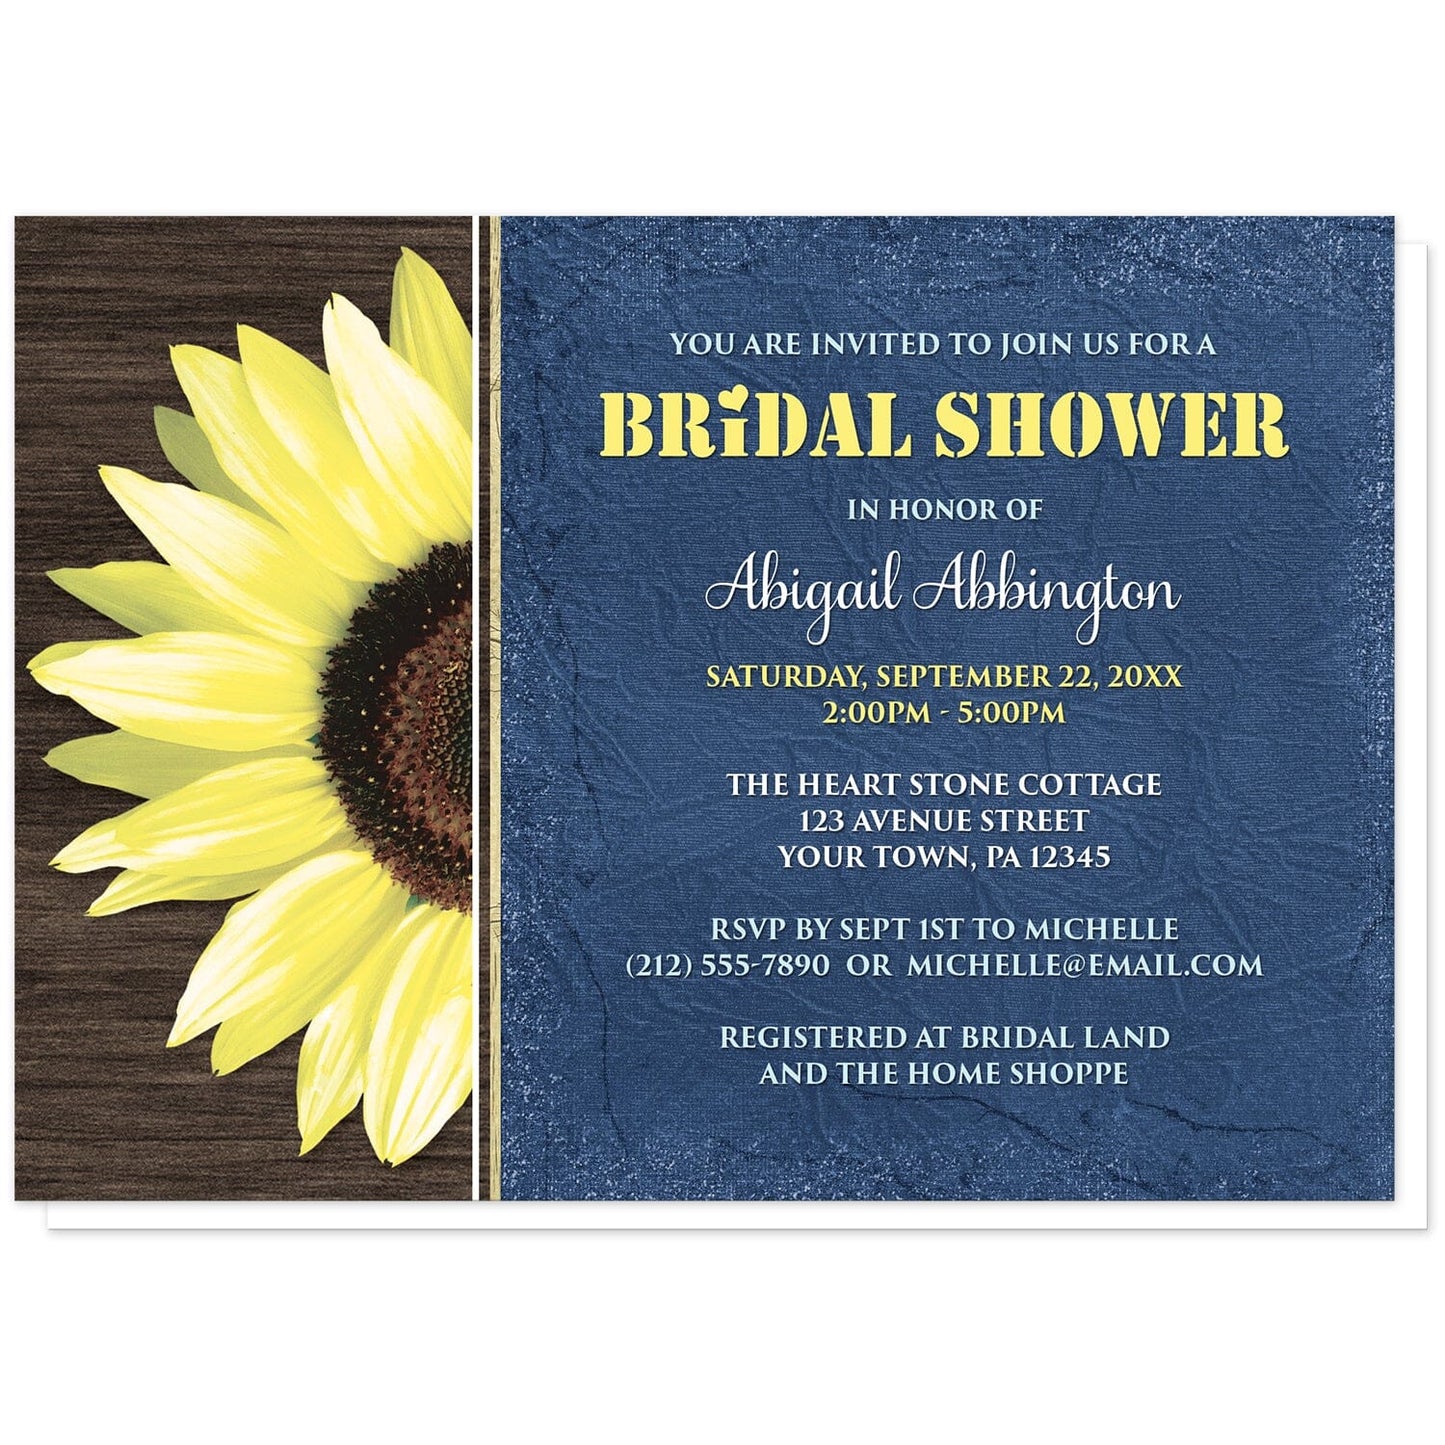 Rustic Sunflower with Blue Bridal Shower Invitations at Artistically Invited. Country-inspired rustic sunflower with blue bridal shower invitations featuring a vibrant bright yellow sunflower over a textured dark brown wood design along the left side. Your personalized bridal shower celebration details are custom printed in yellow and white over a tattered blue cloth illustration to the right of the sunflower.